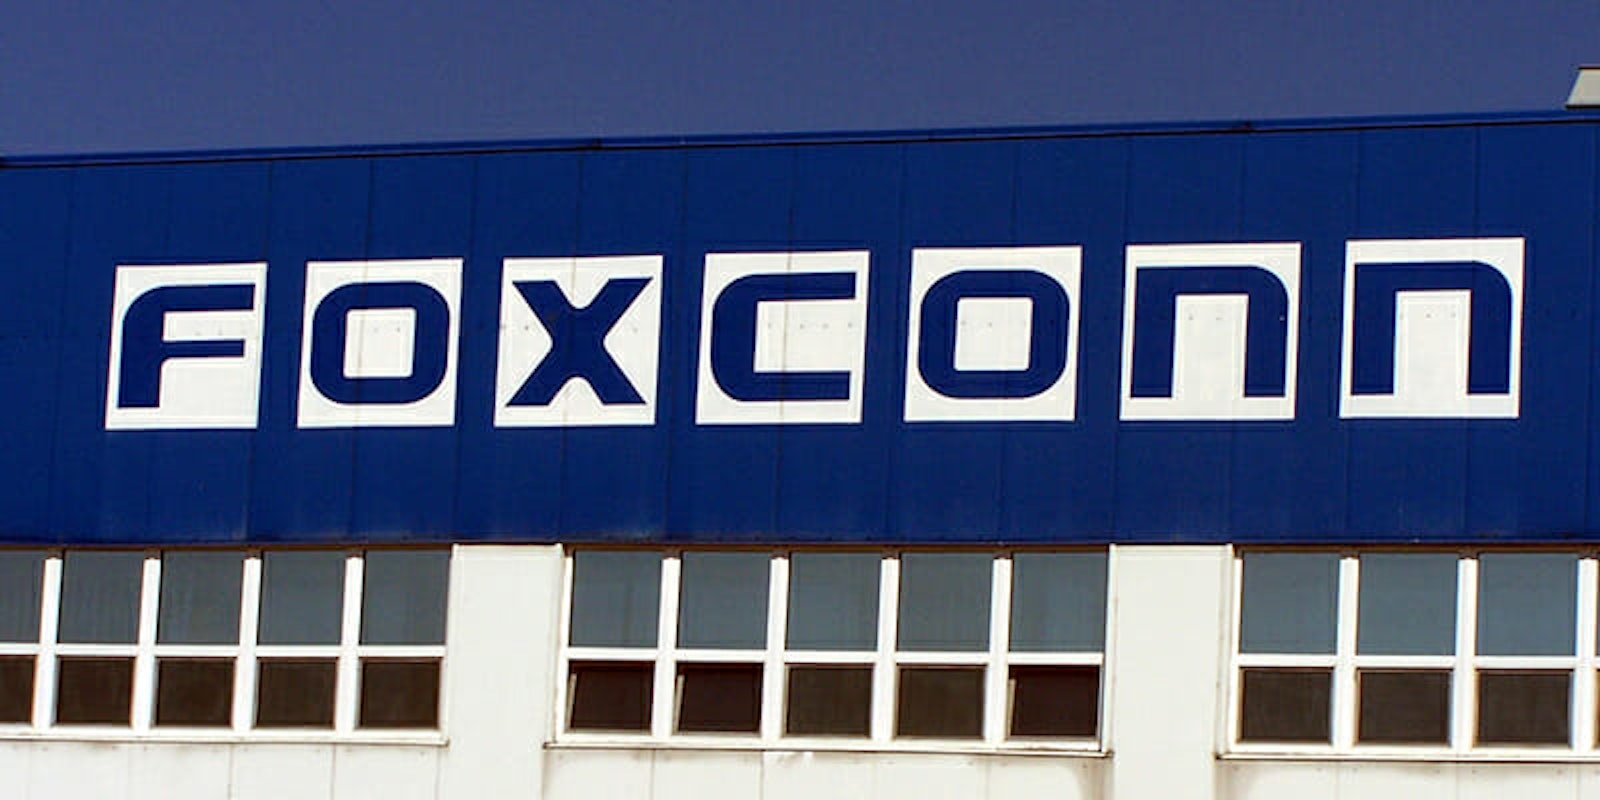 Foxconn is set to purchase Belkin, Linksys, and Wemo in an $866 million cash merger.